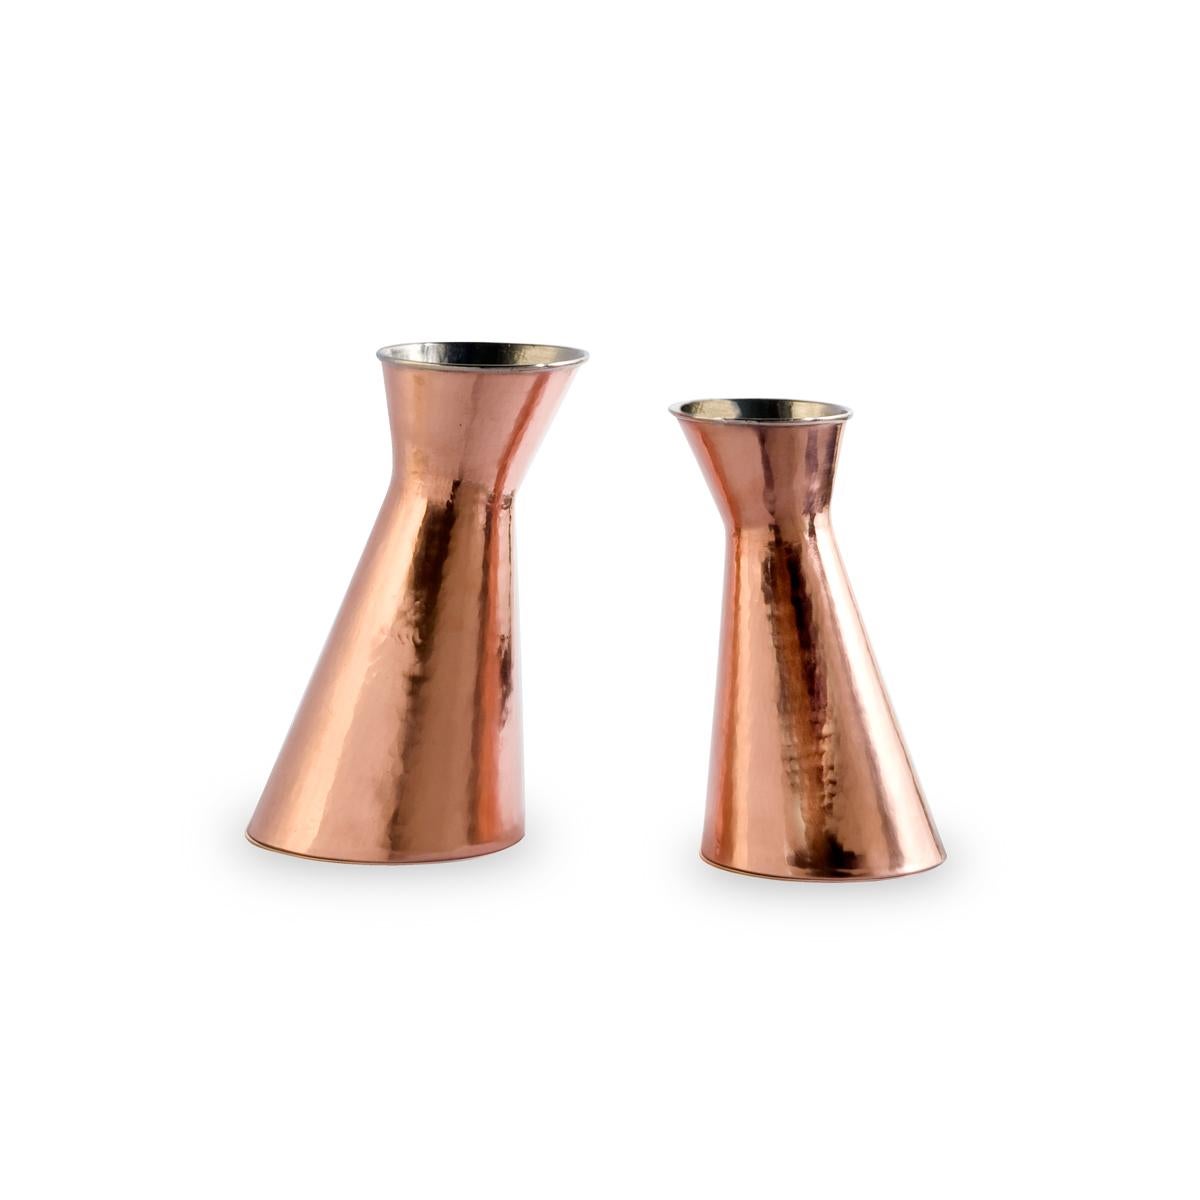 Broka is an embossed copper carafe with a galvanized interior, designed by Cristian Visentin. 

 